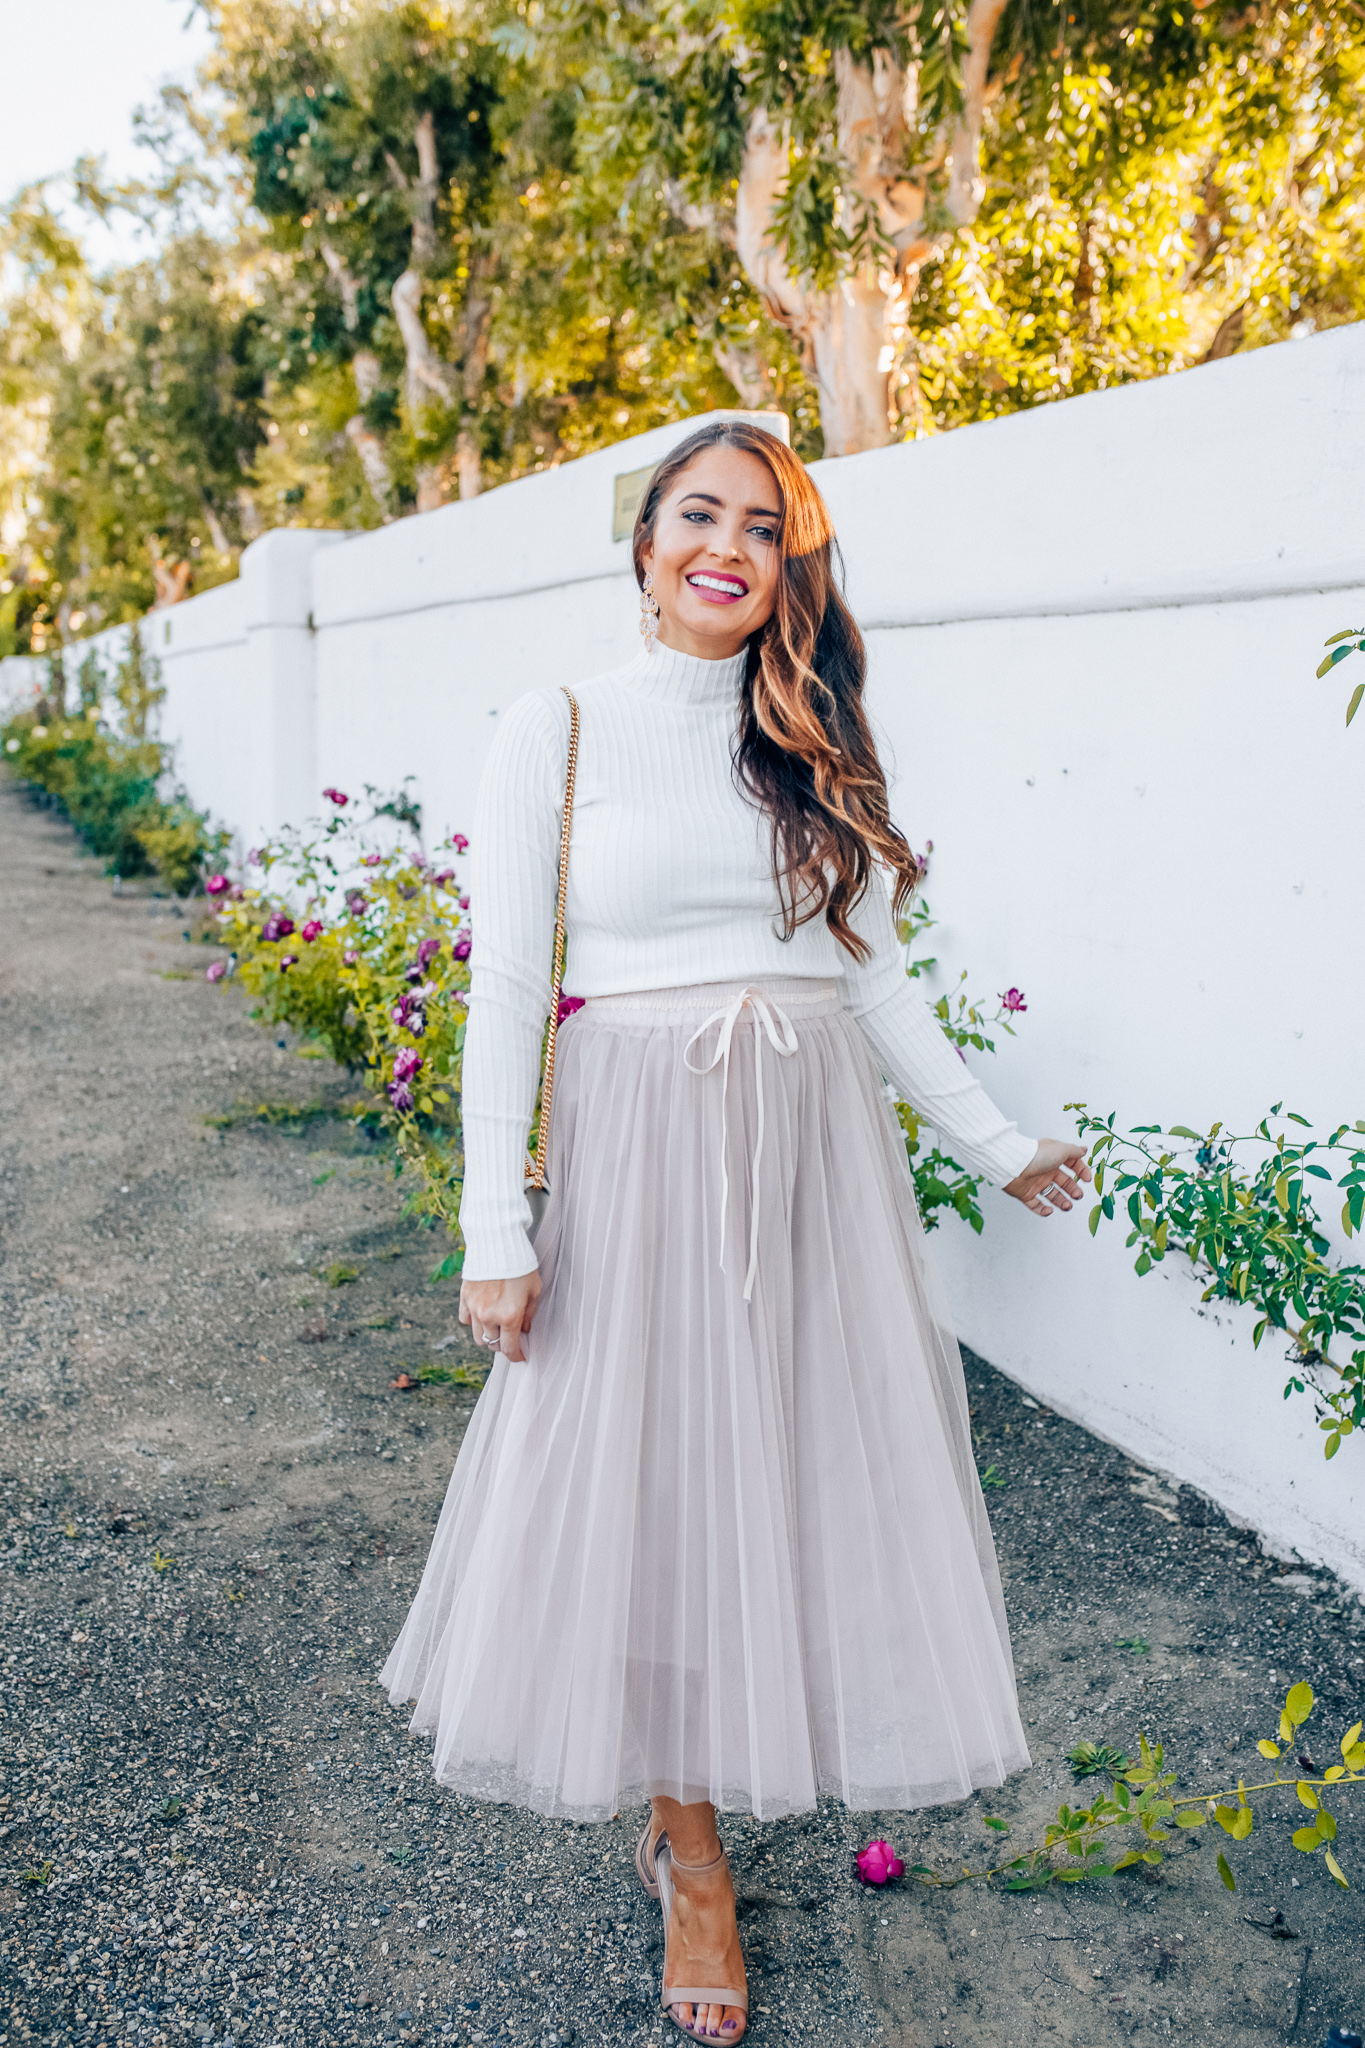 Tips to style a layered tulle skirt featured y top Los Angeles fashion blogger, Maxie Elise: image of a woman wearing a Chicwish long tulle skirt, Forever 21 cream turtleneck, Lisi Lerch earrings and Steve Madden sandals 